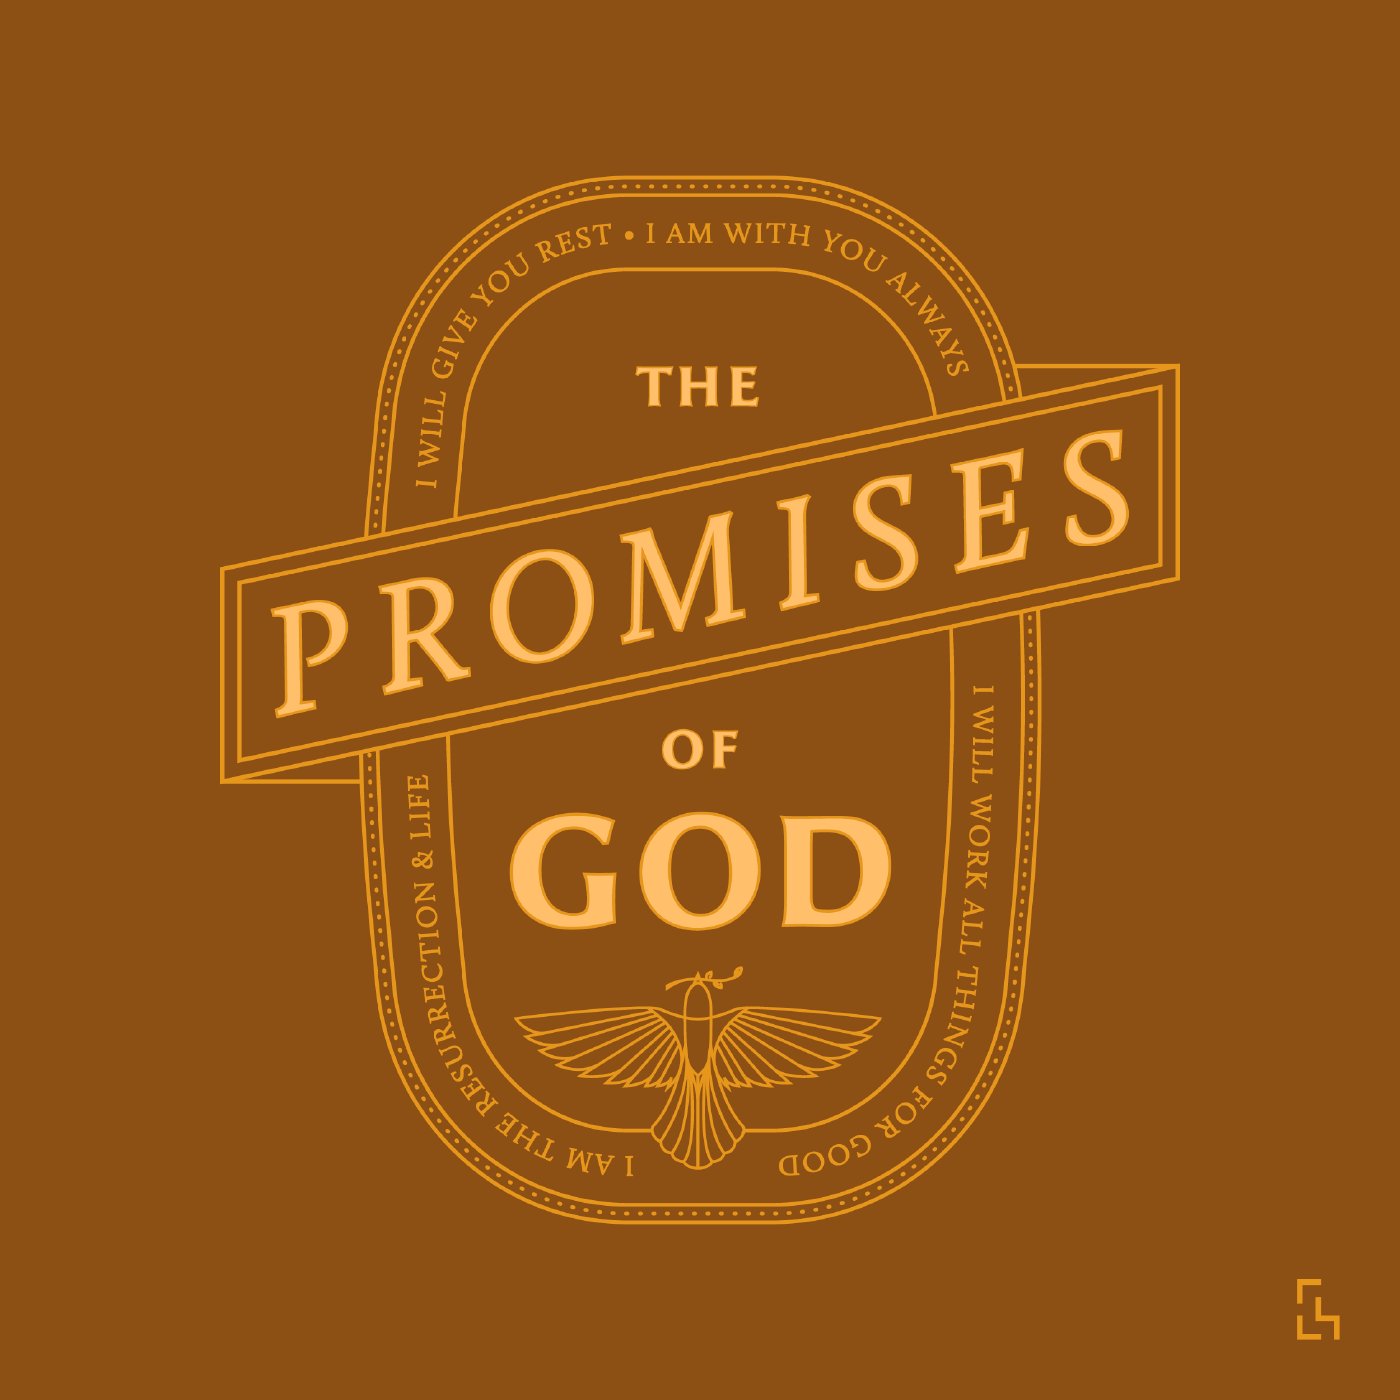 The Promises of God - I Am the Resurrection and the Life